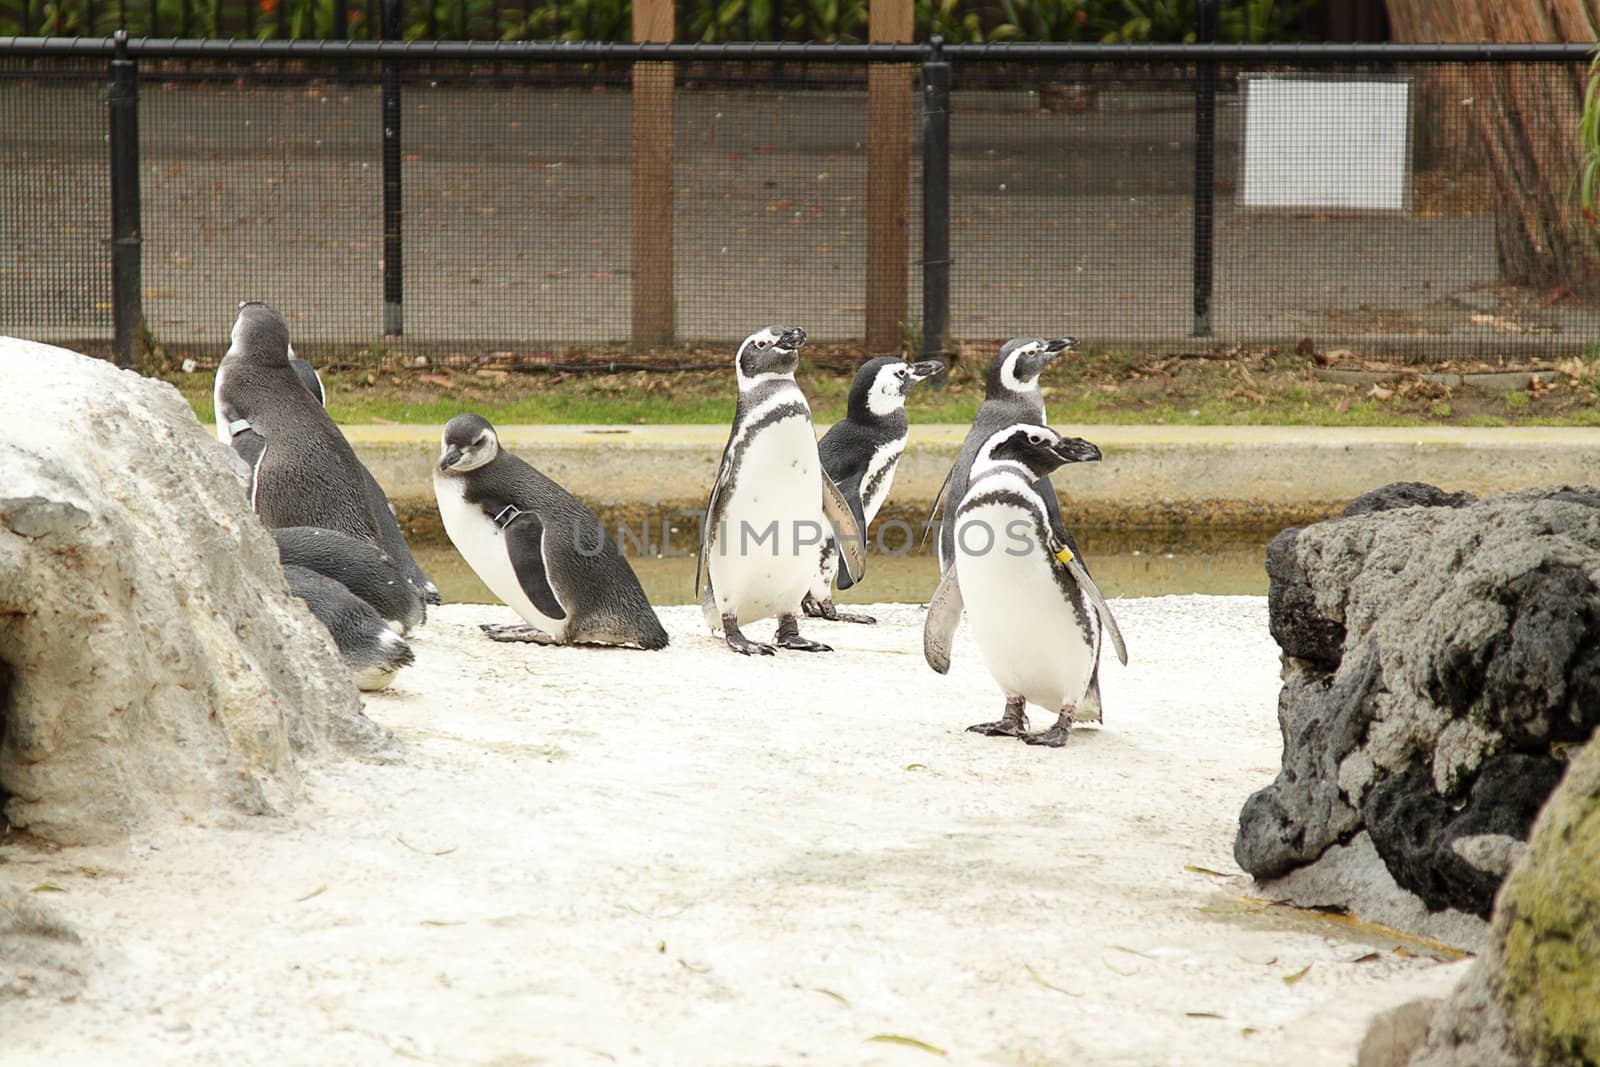 Group of several penguins in the zoo